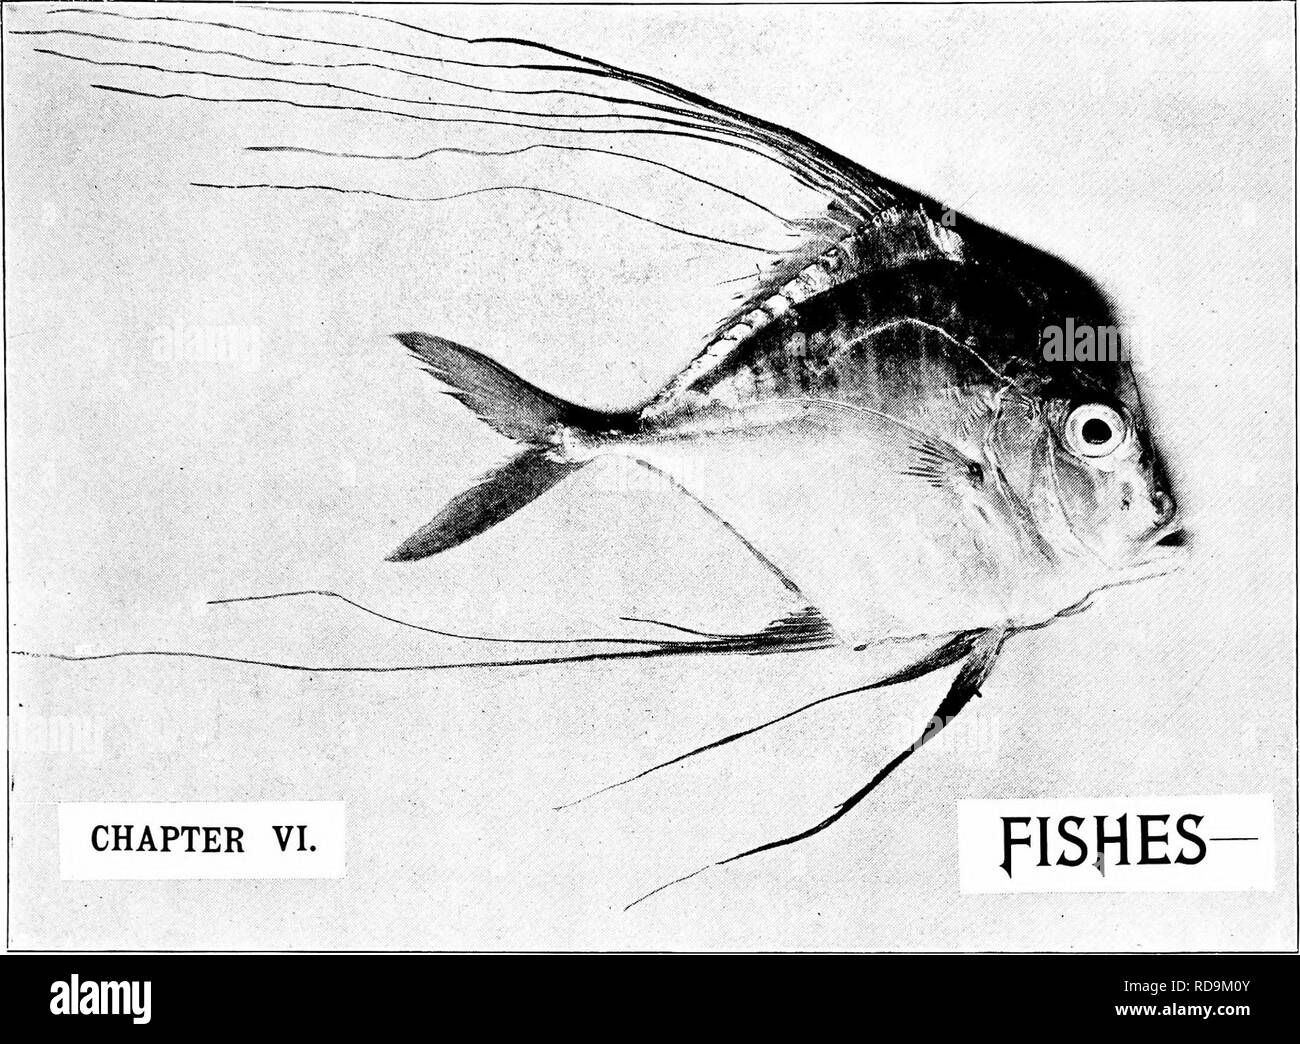 . The naturalist in Australia. Natural history. n: Samlle-Kent, Phofo. PLUMED TEETALLY, Carn)ix gaUiis, p. 169. PjlEflOIVIEflflli fl^lD EGONOJVIIGflL. PJLHE marvellously varied fish fauna of the Australian seas and rivers would require a book, not to say volumes, to do it justice. Within the brief space at present at disposal, little can be attempted beyond an out- line sketch of its leading features, and an indication of those among its multifarious representatives which, with regard to their economic utility, bizarre contour, or remarkable habits or alliances, stand out pre-eminently among t Stock Photo